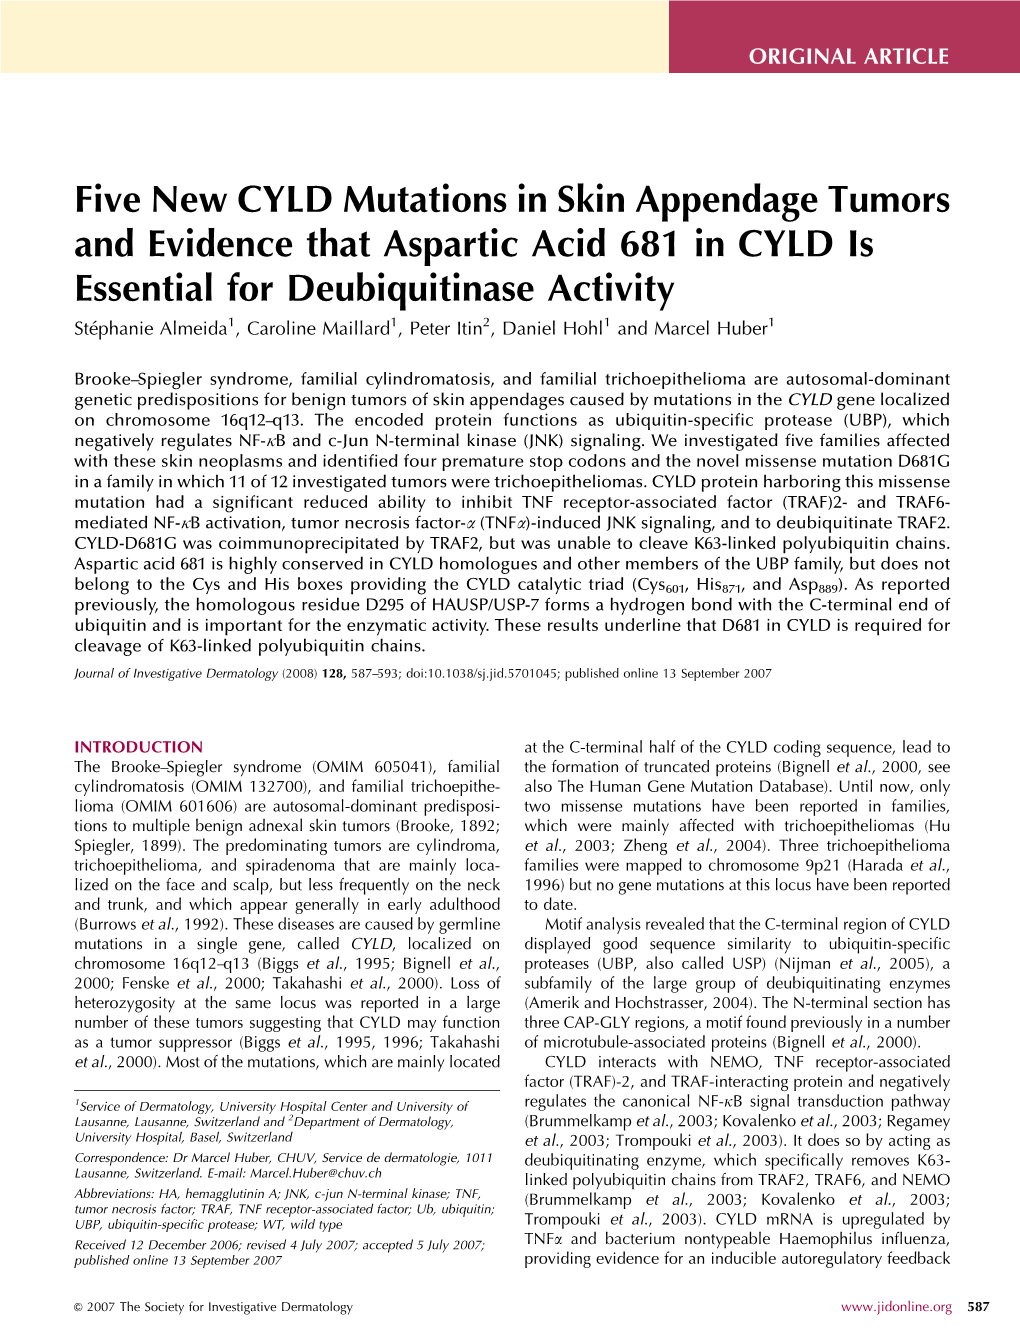 Five New CYLD Mutations in Skin Appendage Tumors and Evidence That Aspartic Acid 681 in CYLD Is Essential for Deubiquitinase